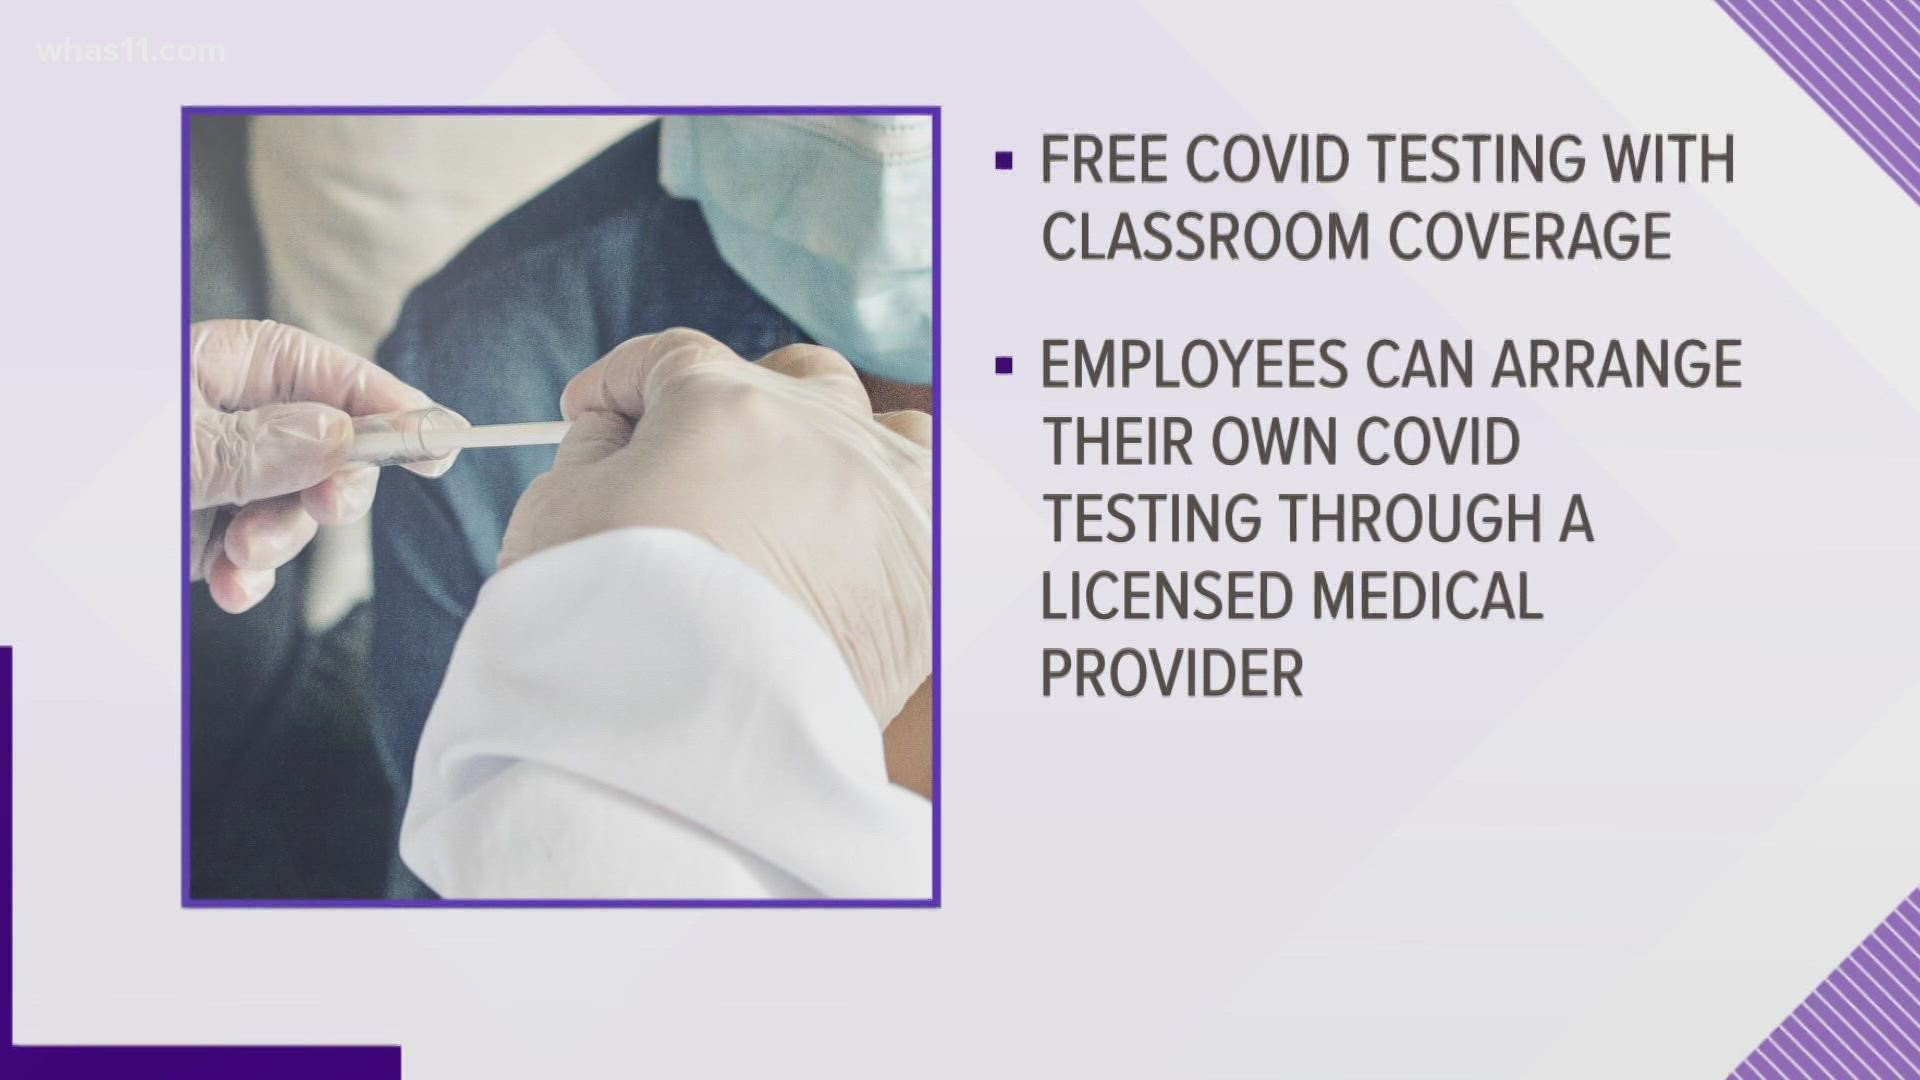 JCPS employees must be vaccinated against COVID-19 by Oct. 14 or be tested every week. JCTA is in full support of the testing option that's available for employees.